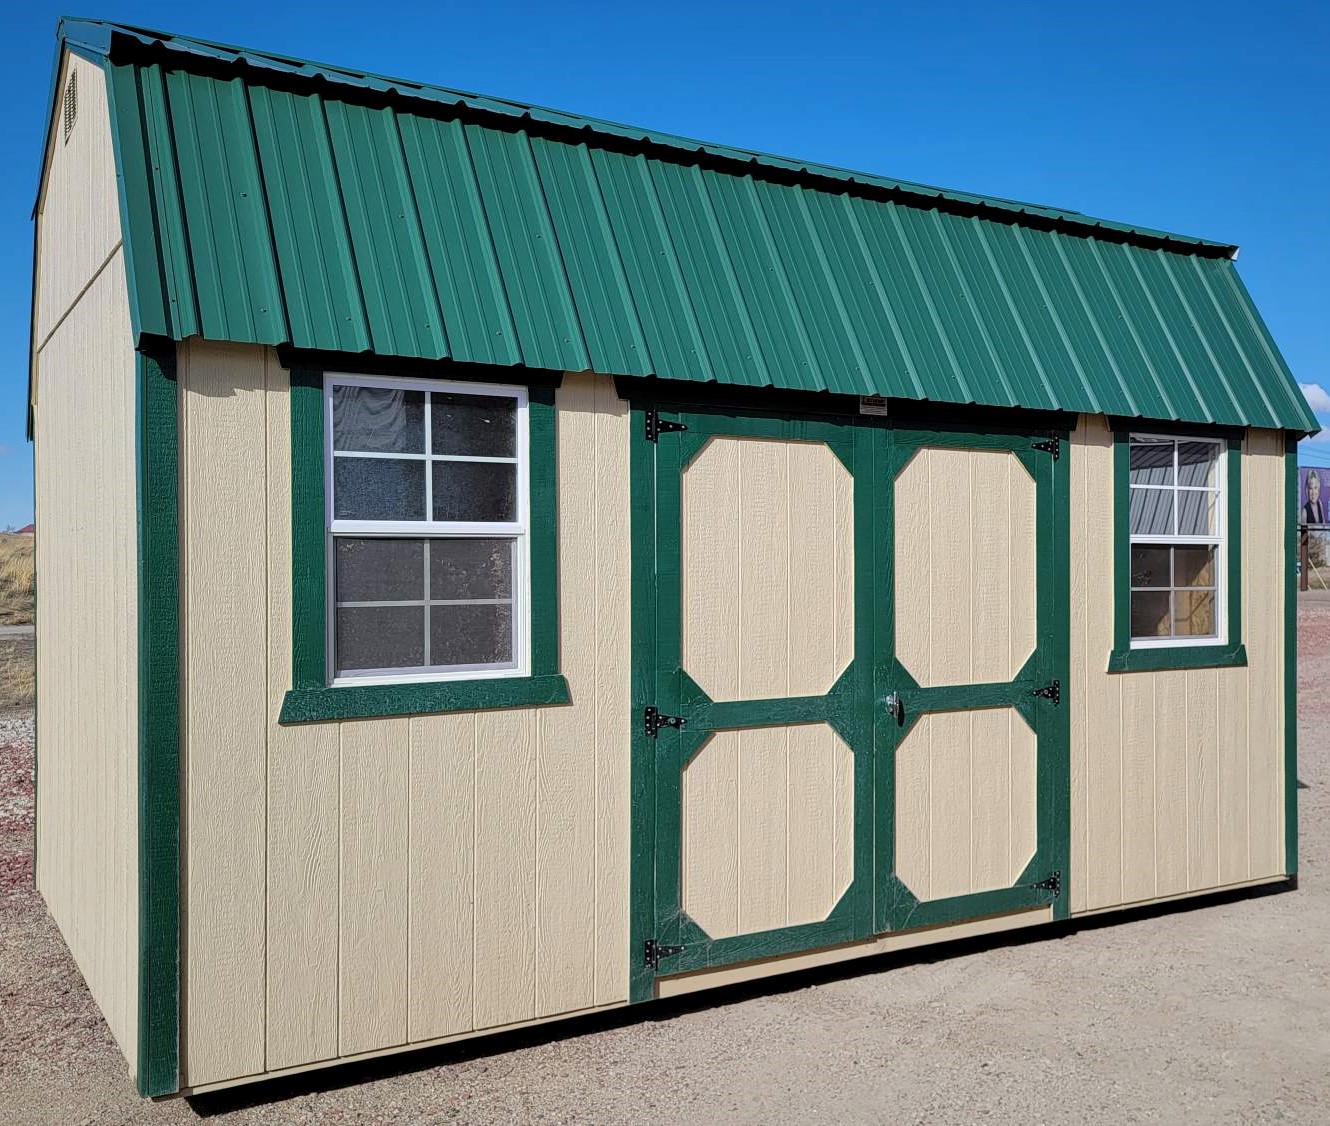 Buy Now: 10x16 Painted Lofted Barn Shed For Sale | Sheds For Sale or Custom order Sheds